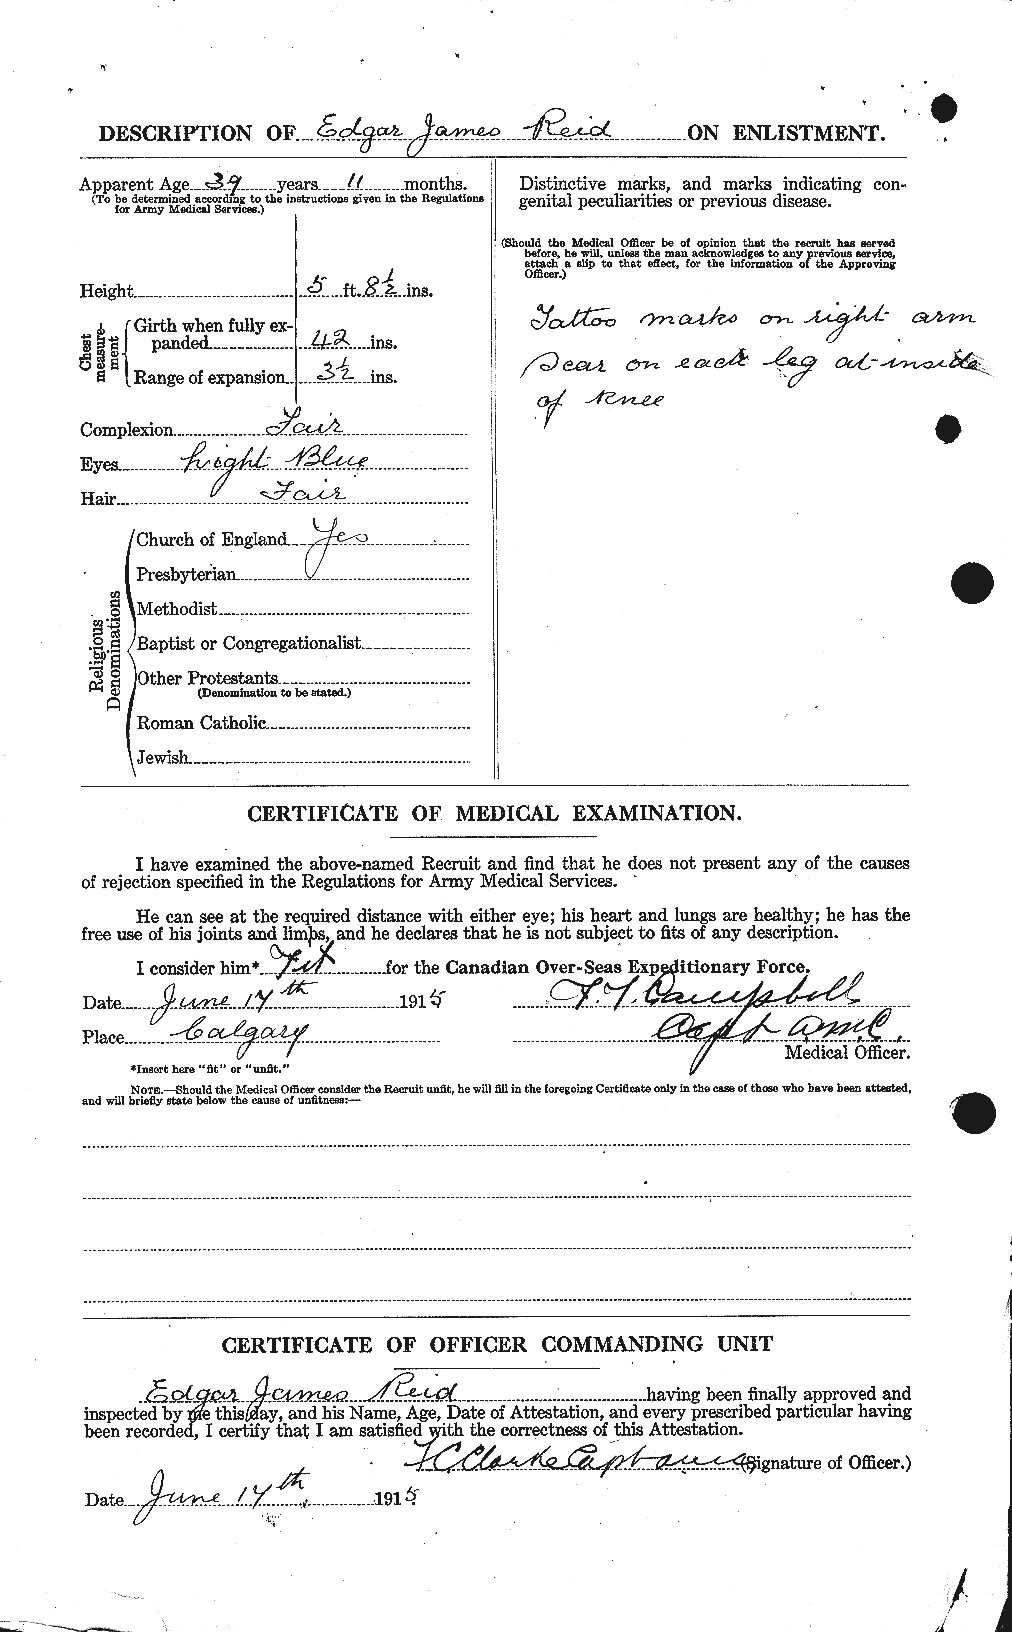 Personnel Records of the First World War - CEF 597978b